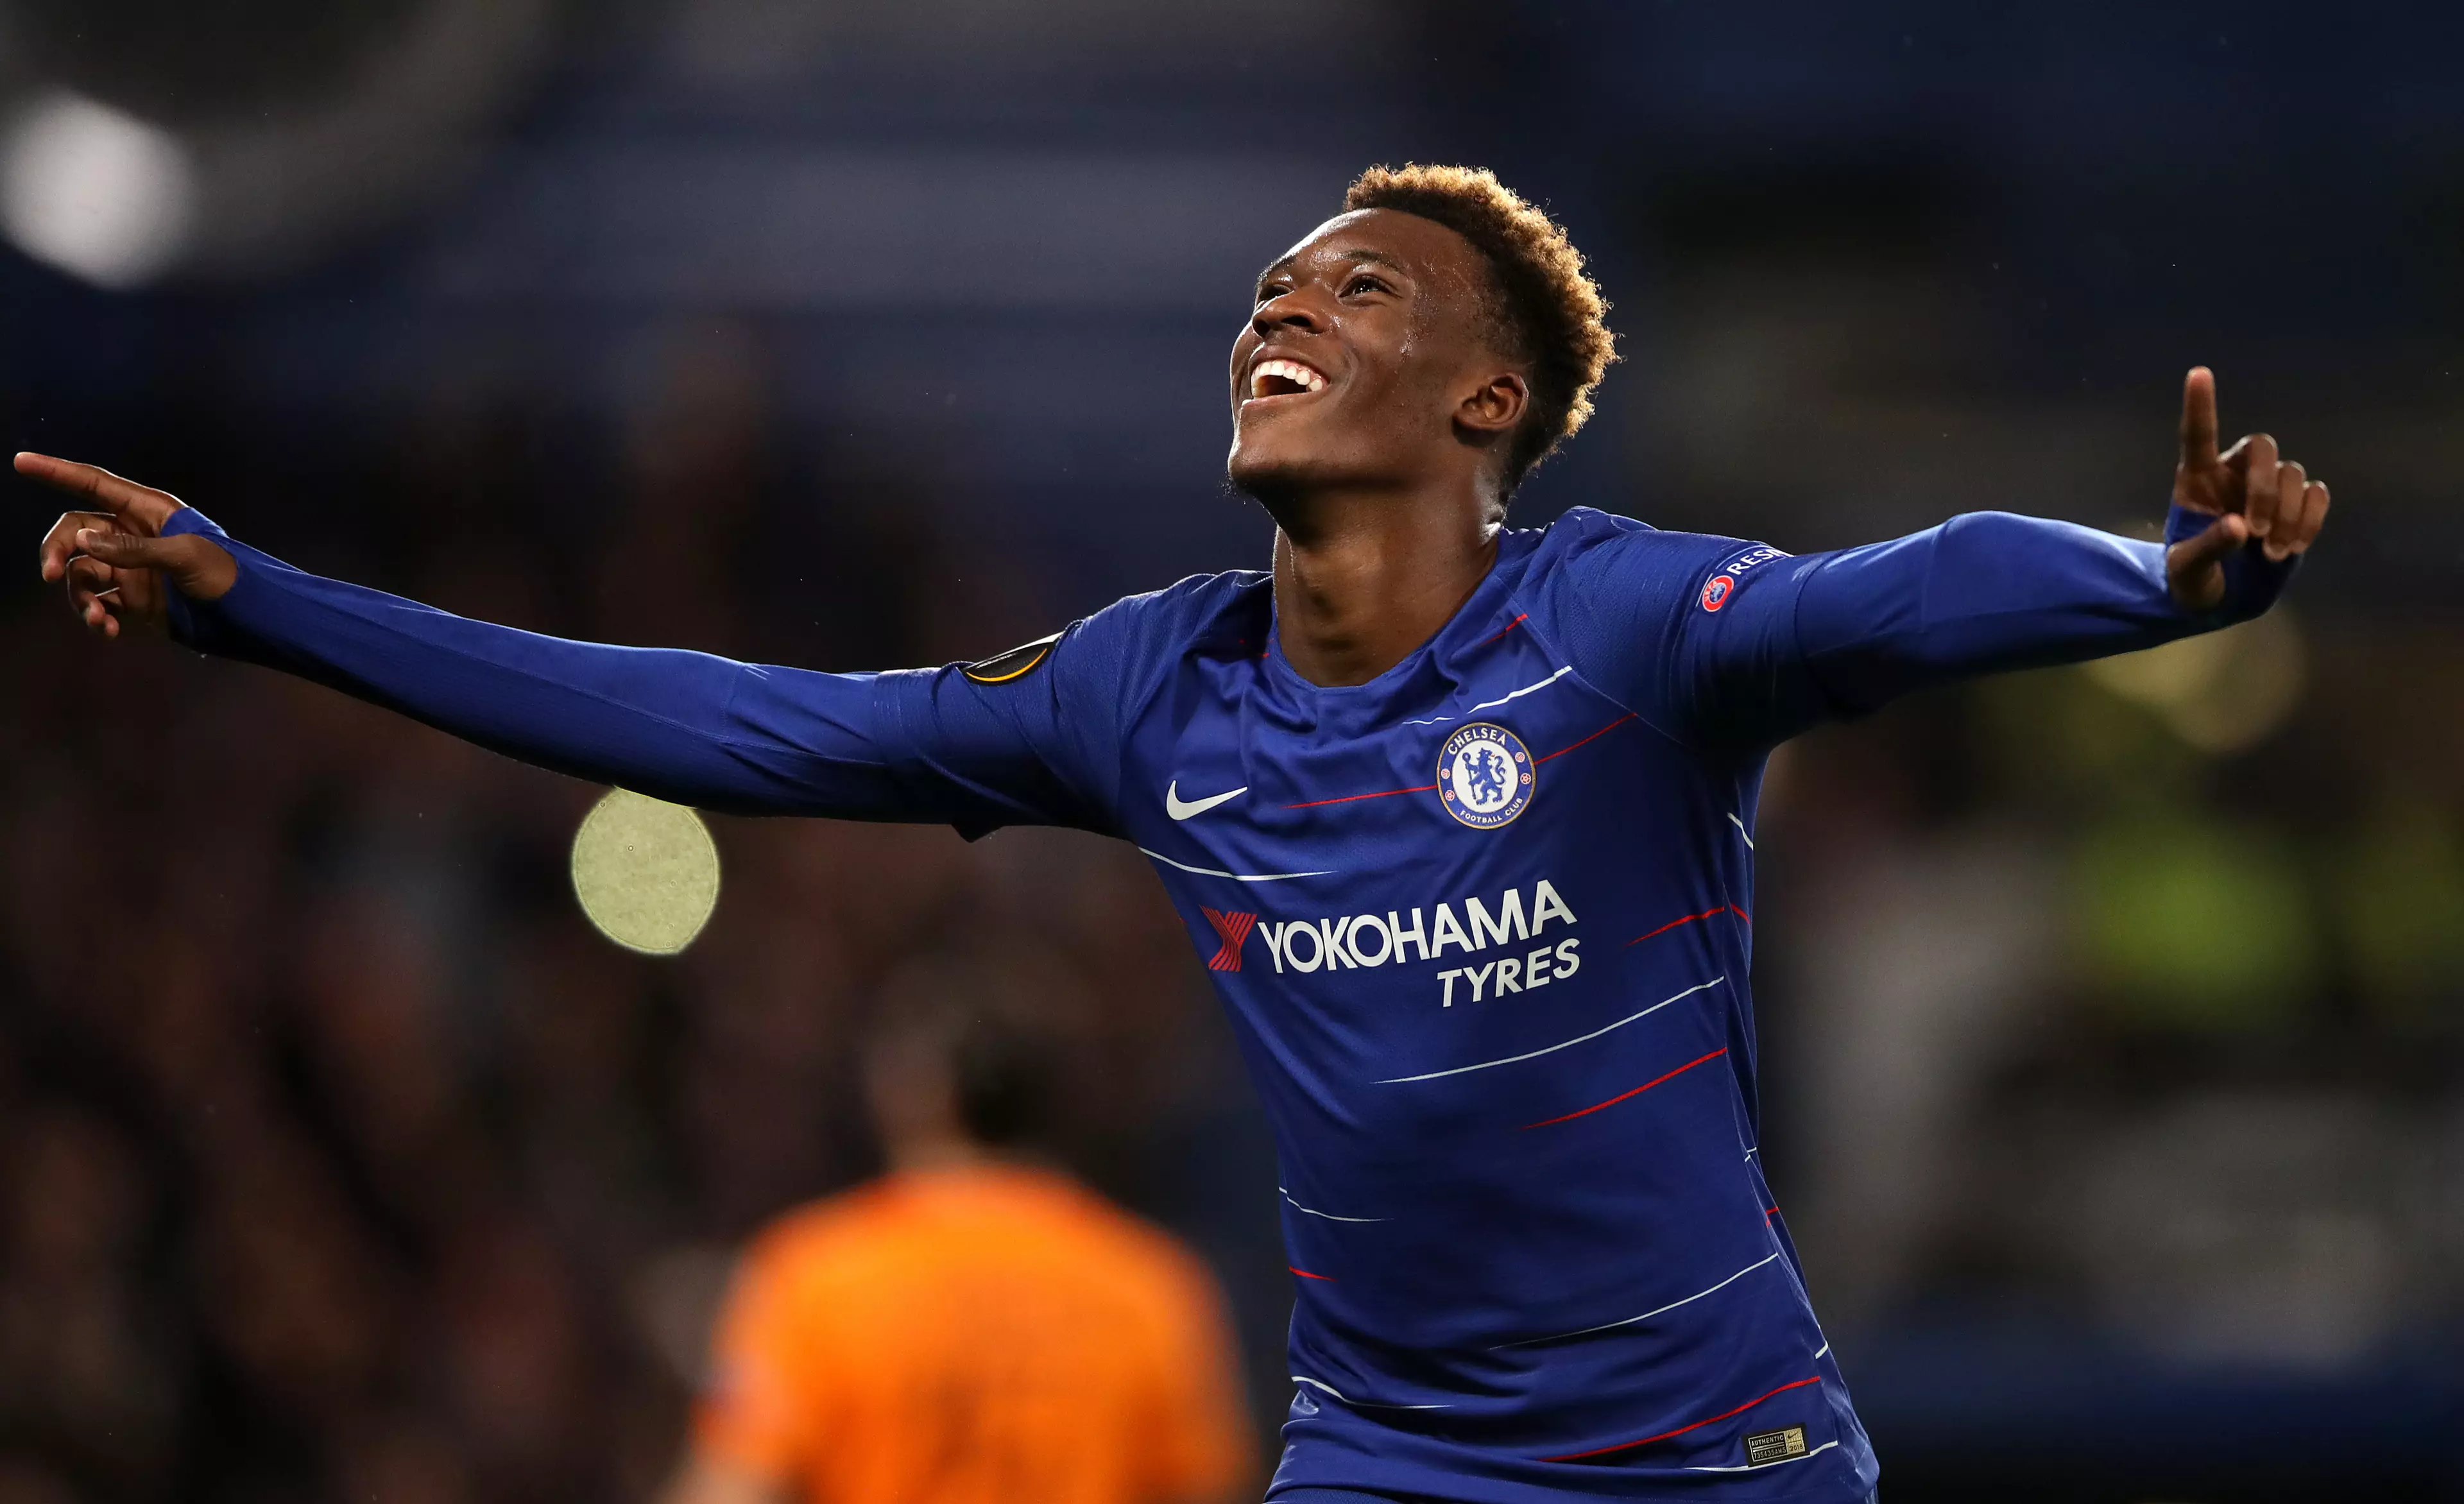 Hudson-Odoi will hope to avoid the curse of the Chelsea loan spell. Image: PA Images